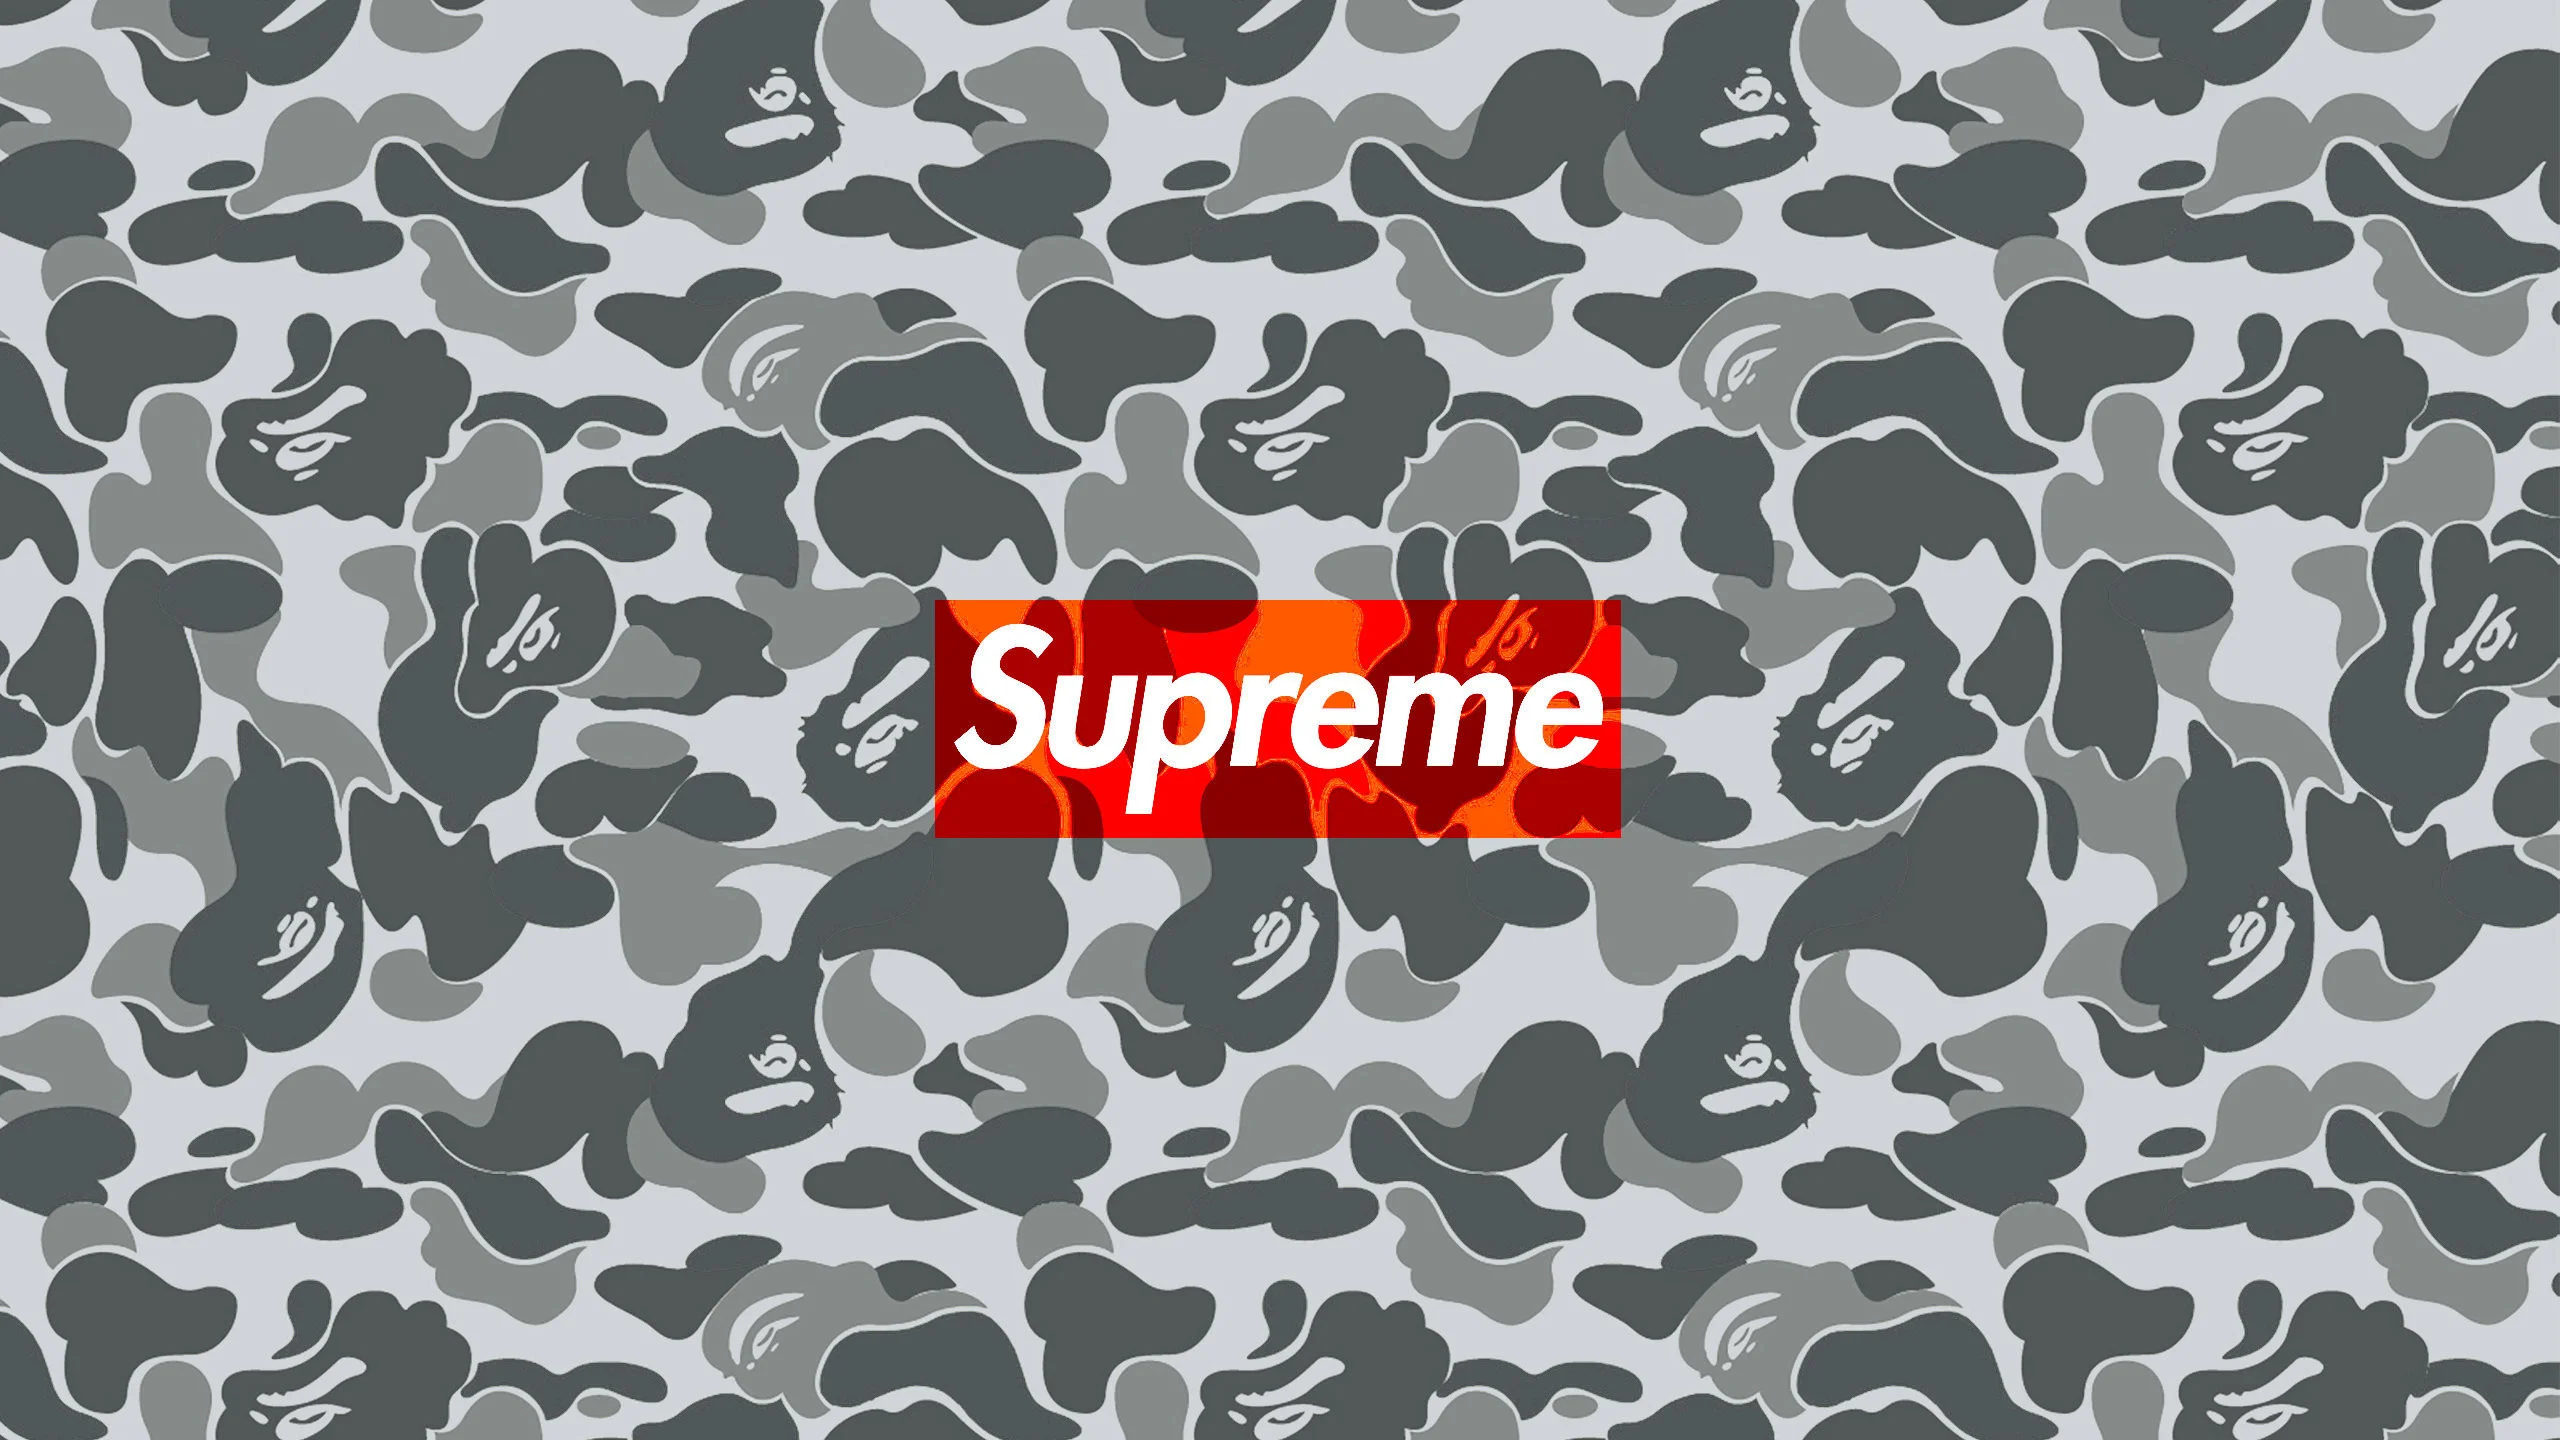 Download the Supreme Bape Camo wallpaper below for your mobile device  (Android phones, iPhone etc.)